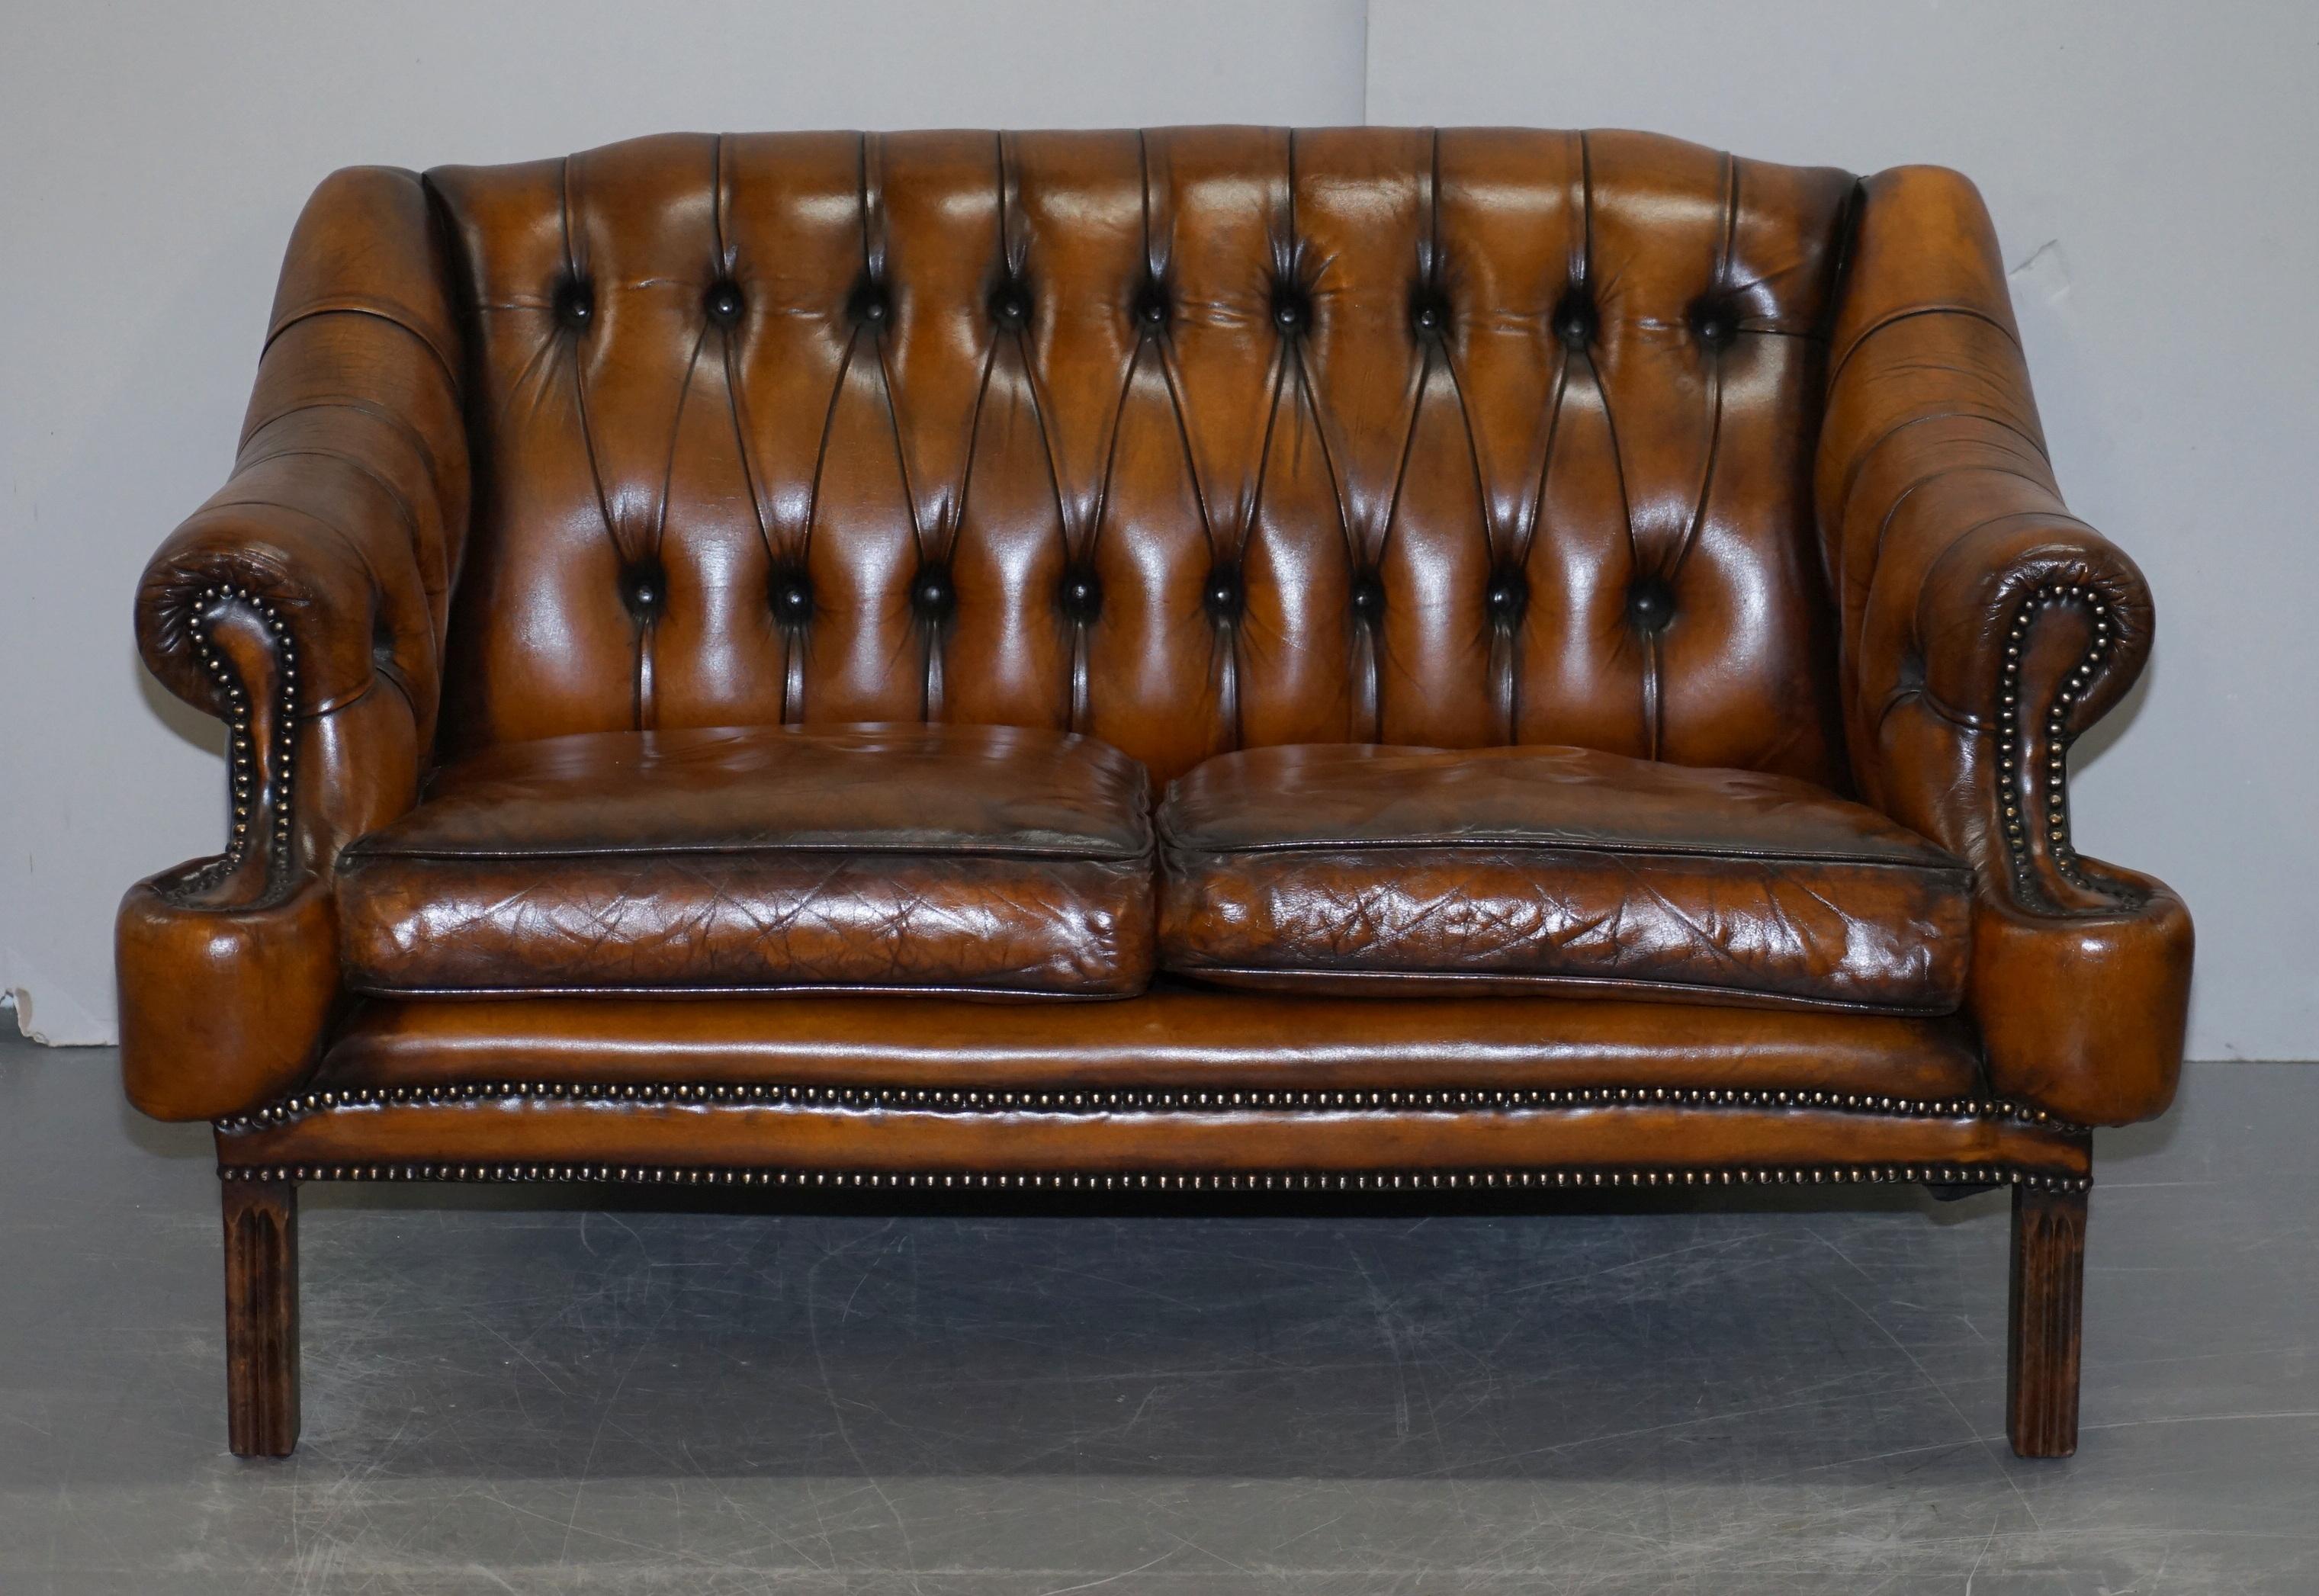 We are delighted to this stunning very rare midcentury Lutyen’s Viceroy style chesterfield hand dyed whiskey brown leather sofa

A very rare model sofa, originally made by Lutyen’s in the latter part of the Victorian era, the family still make the